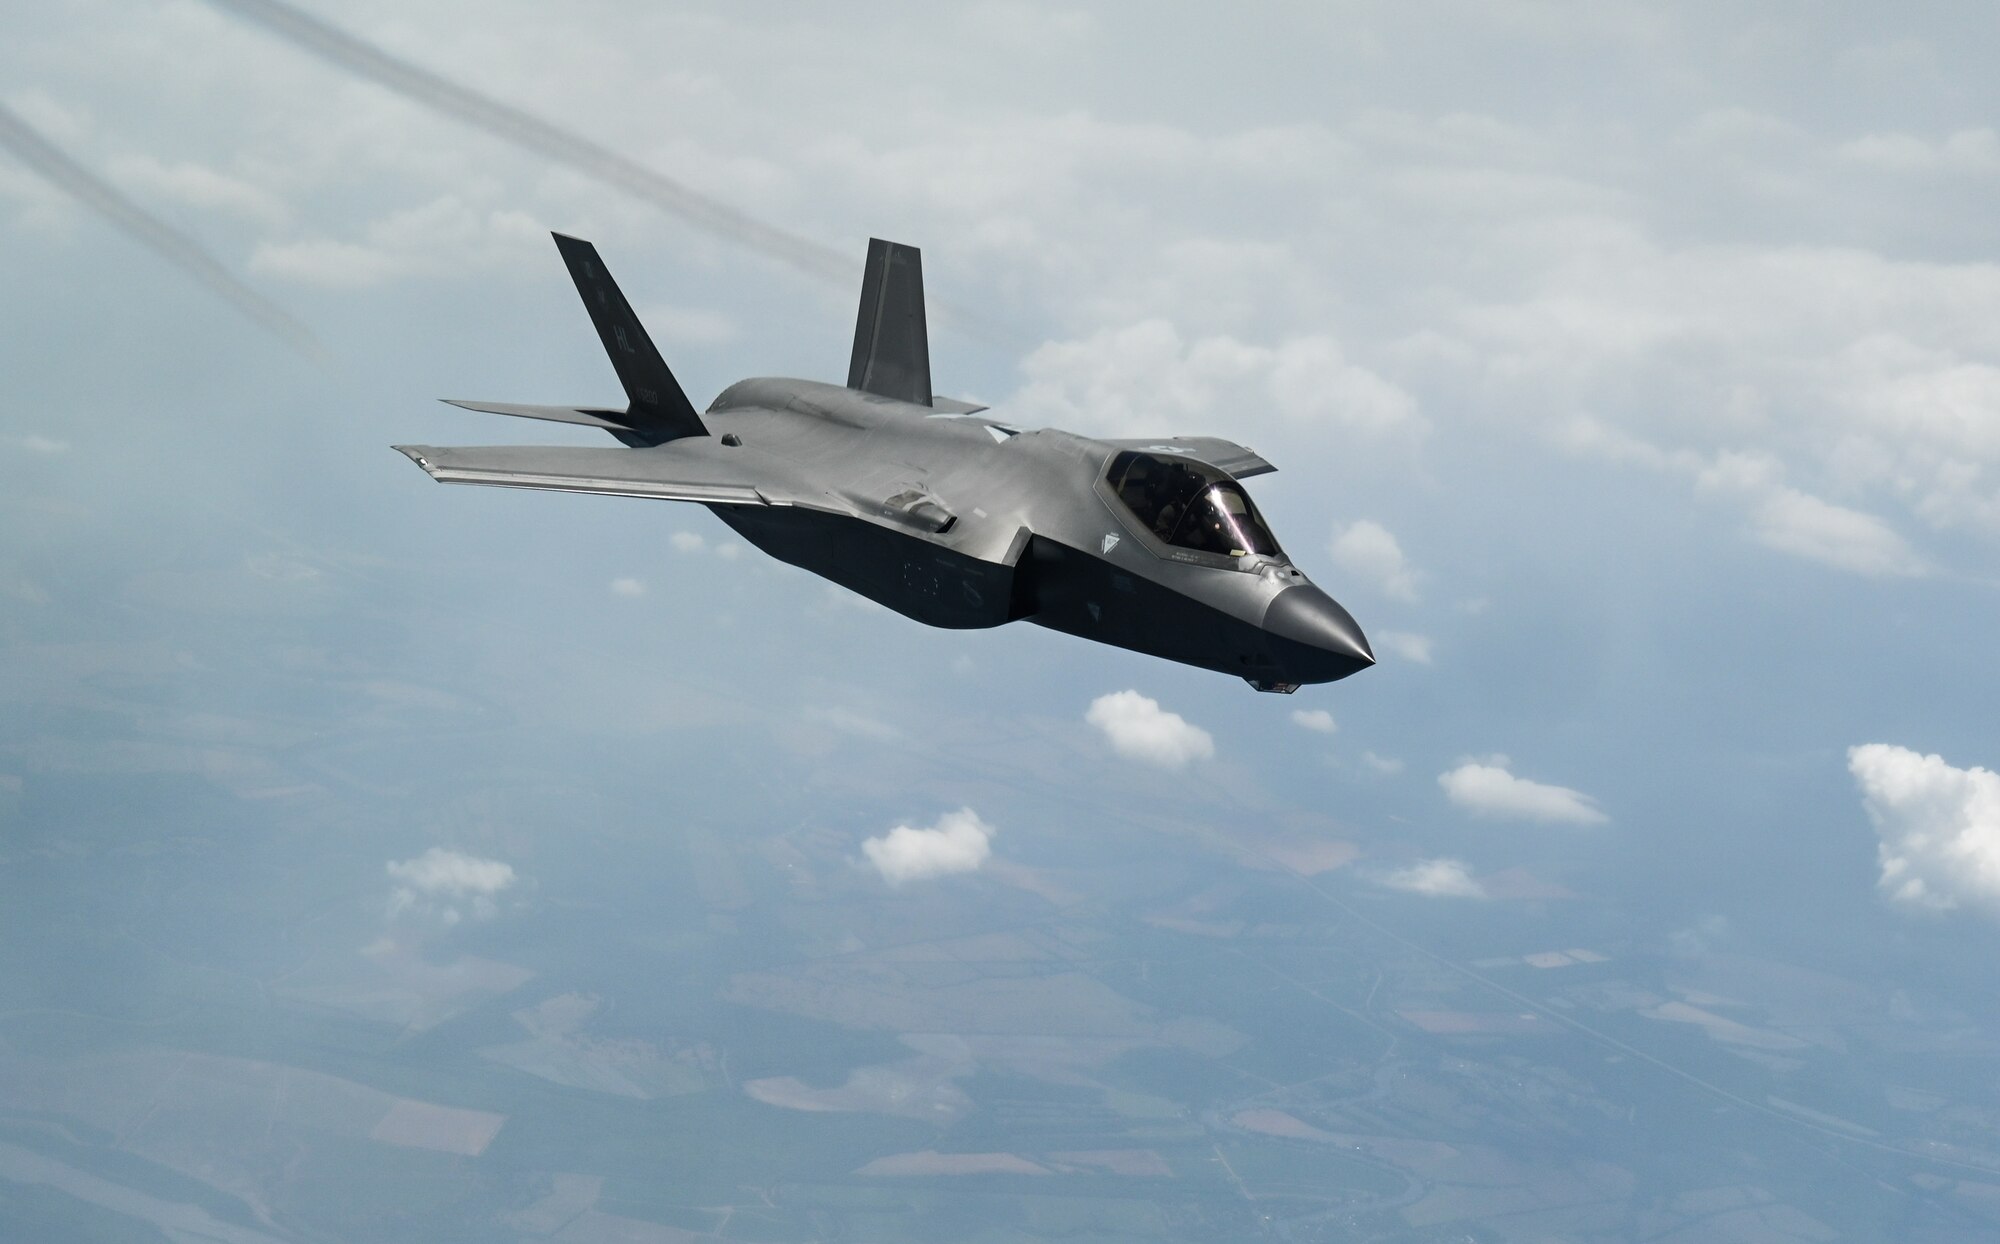 The F-35 Lightning II Demonstration Team assigned to 388th Fighter Wing at Hill Air Force Base, Utah, heads back to home station after receiving aerial refueling from a KC-135 Stratotanker assigned to the 465th Air Refueling Squadron at Tinker Air Force Base, Oklahoma, May 31, 2023.  Aerial refueling allows aircraft across the DoD inventory to travel greater distances without having to land to refuel.